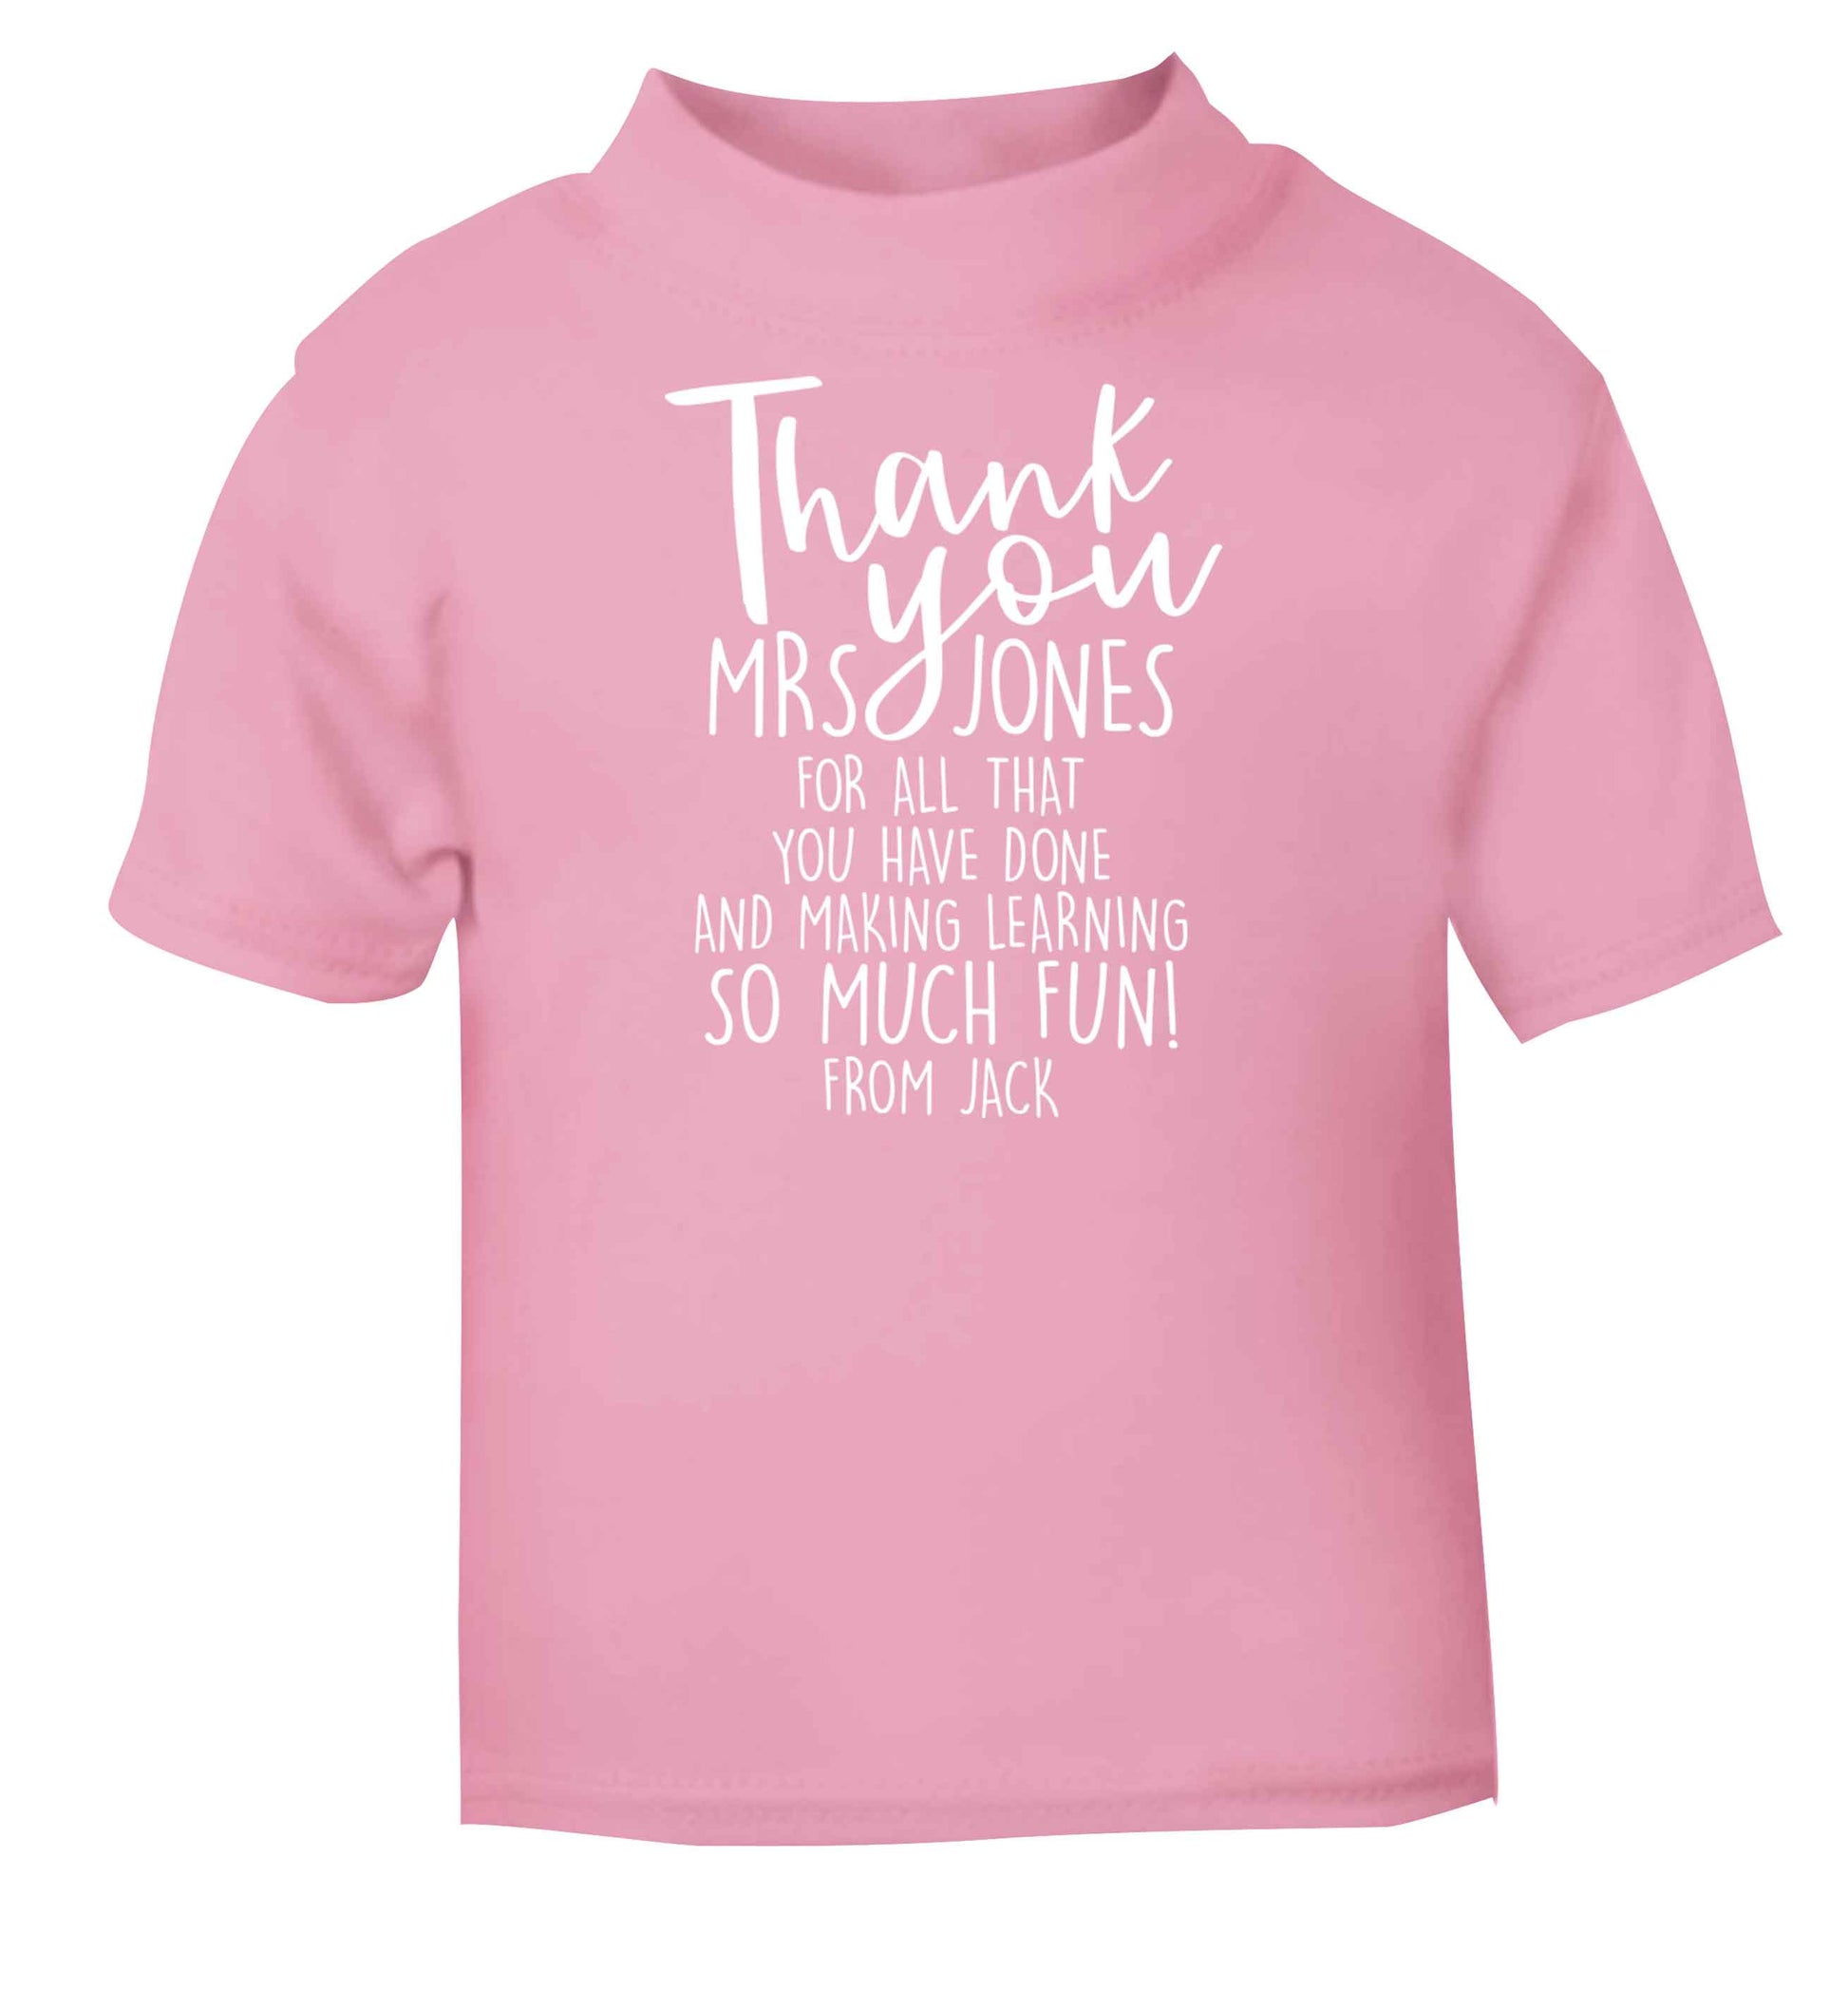 Personalised thank you teacher for all that you've done and making learning so much fun light pink baby toddler Tshirt 2 Years